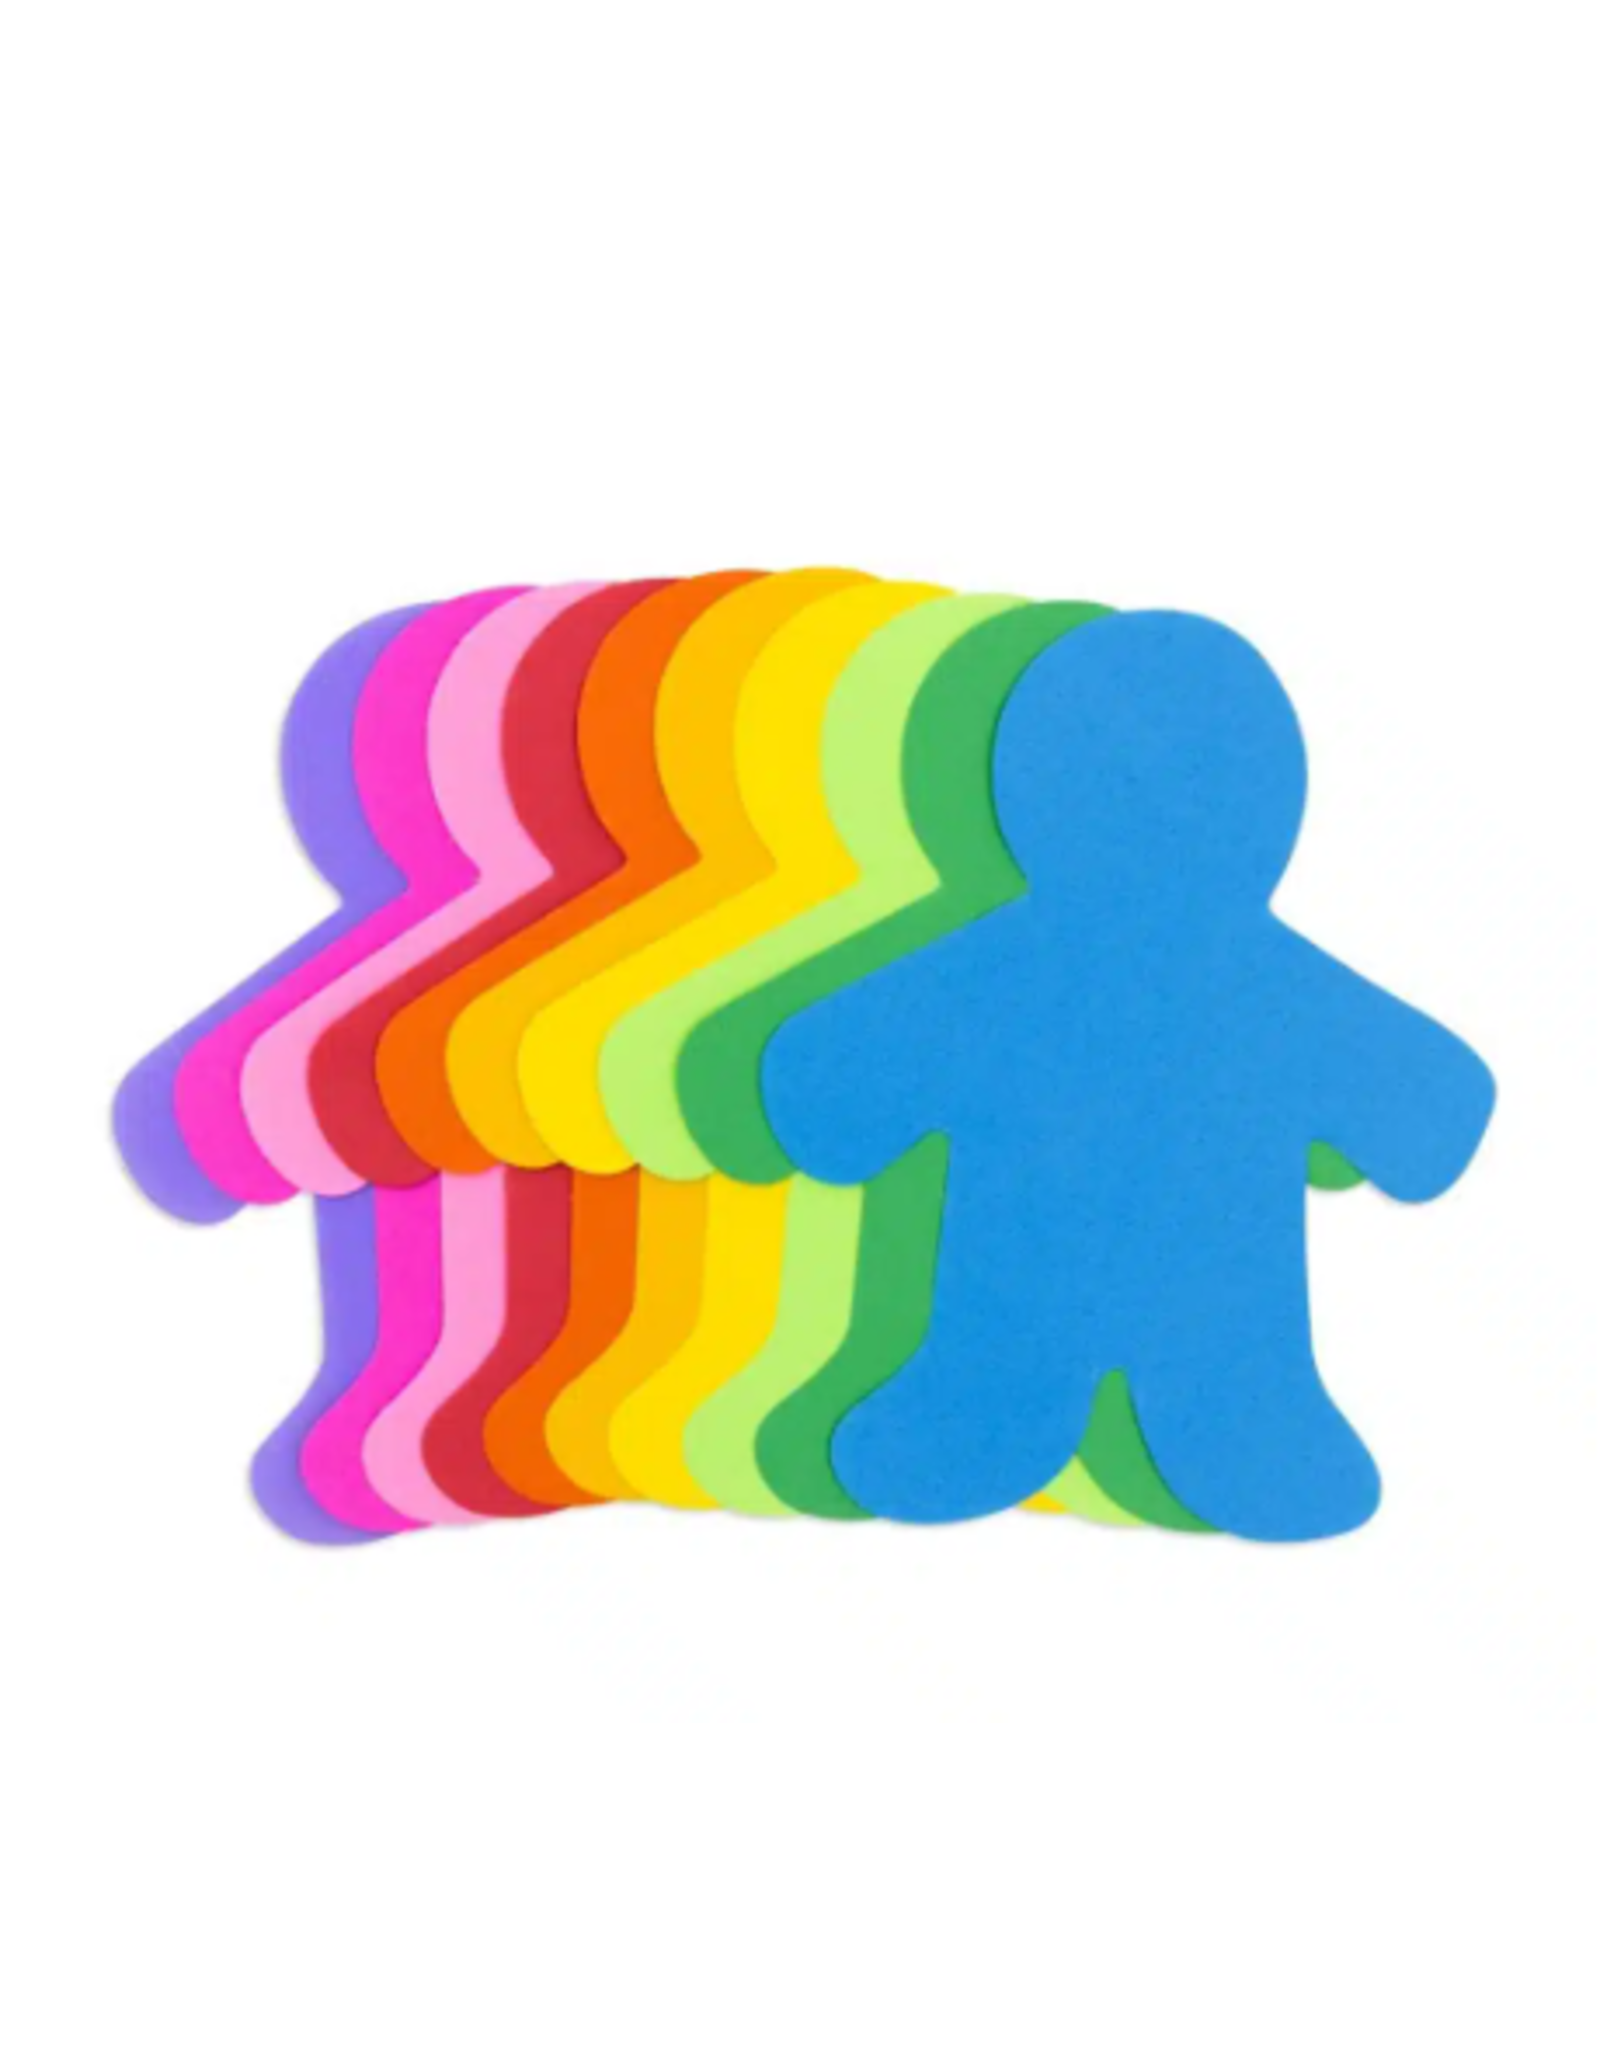 HYGLOSS CUT-OUTS: COLORFUL PERSON  2" 100 PACK